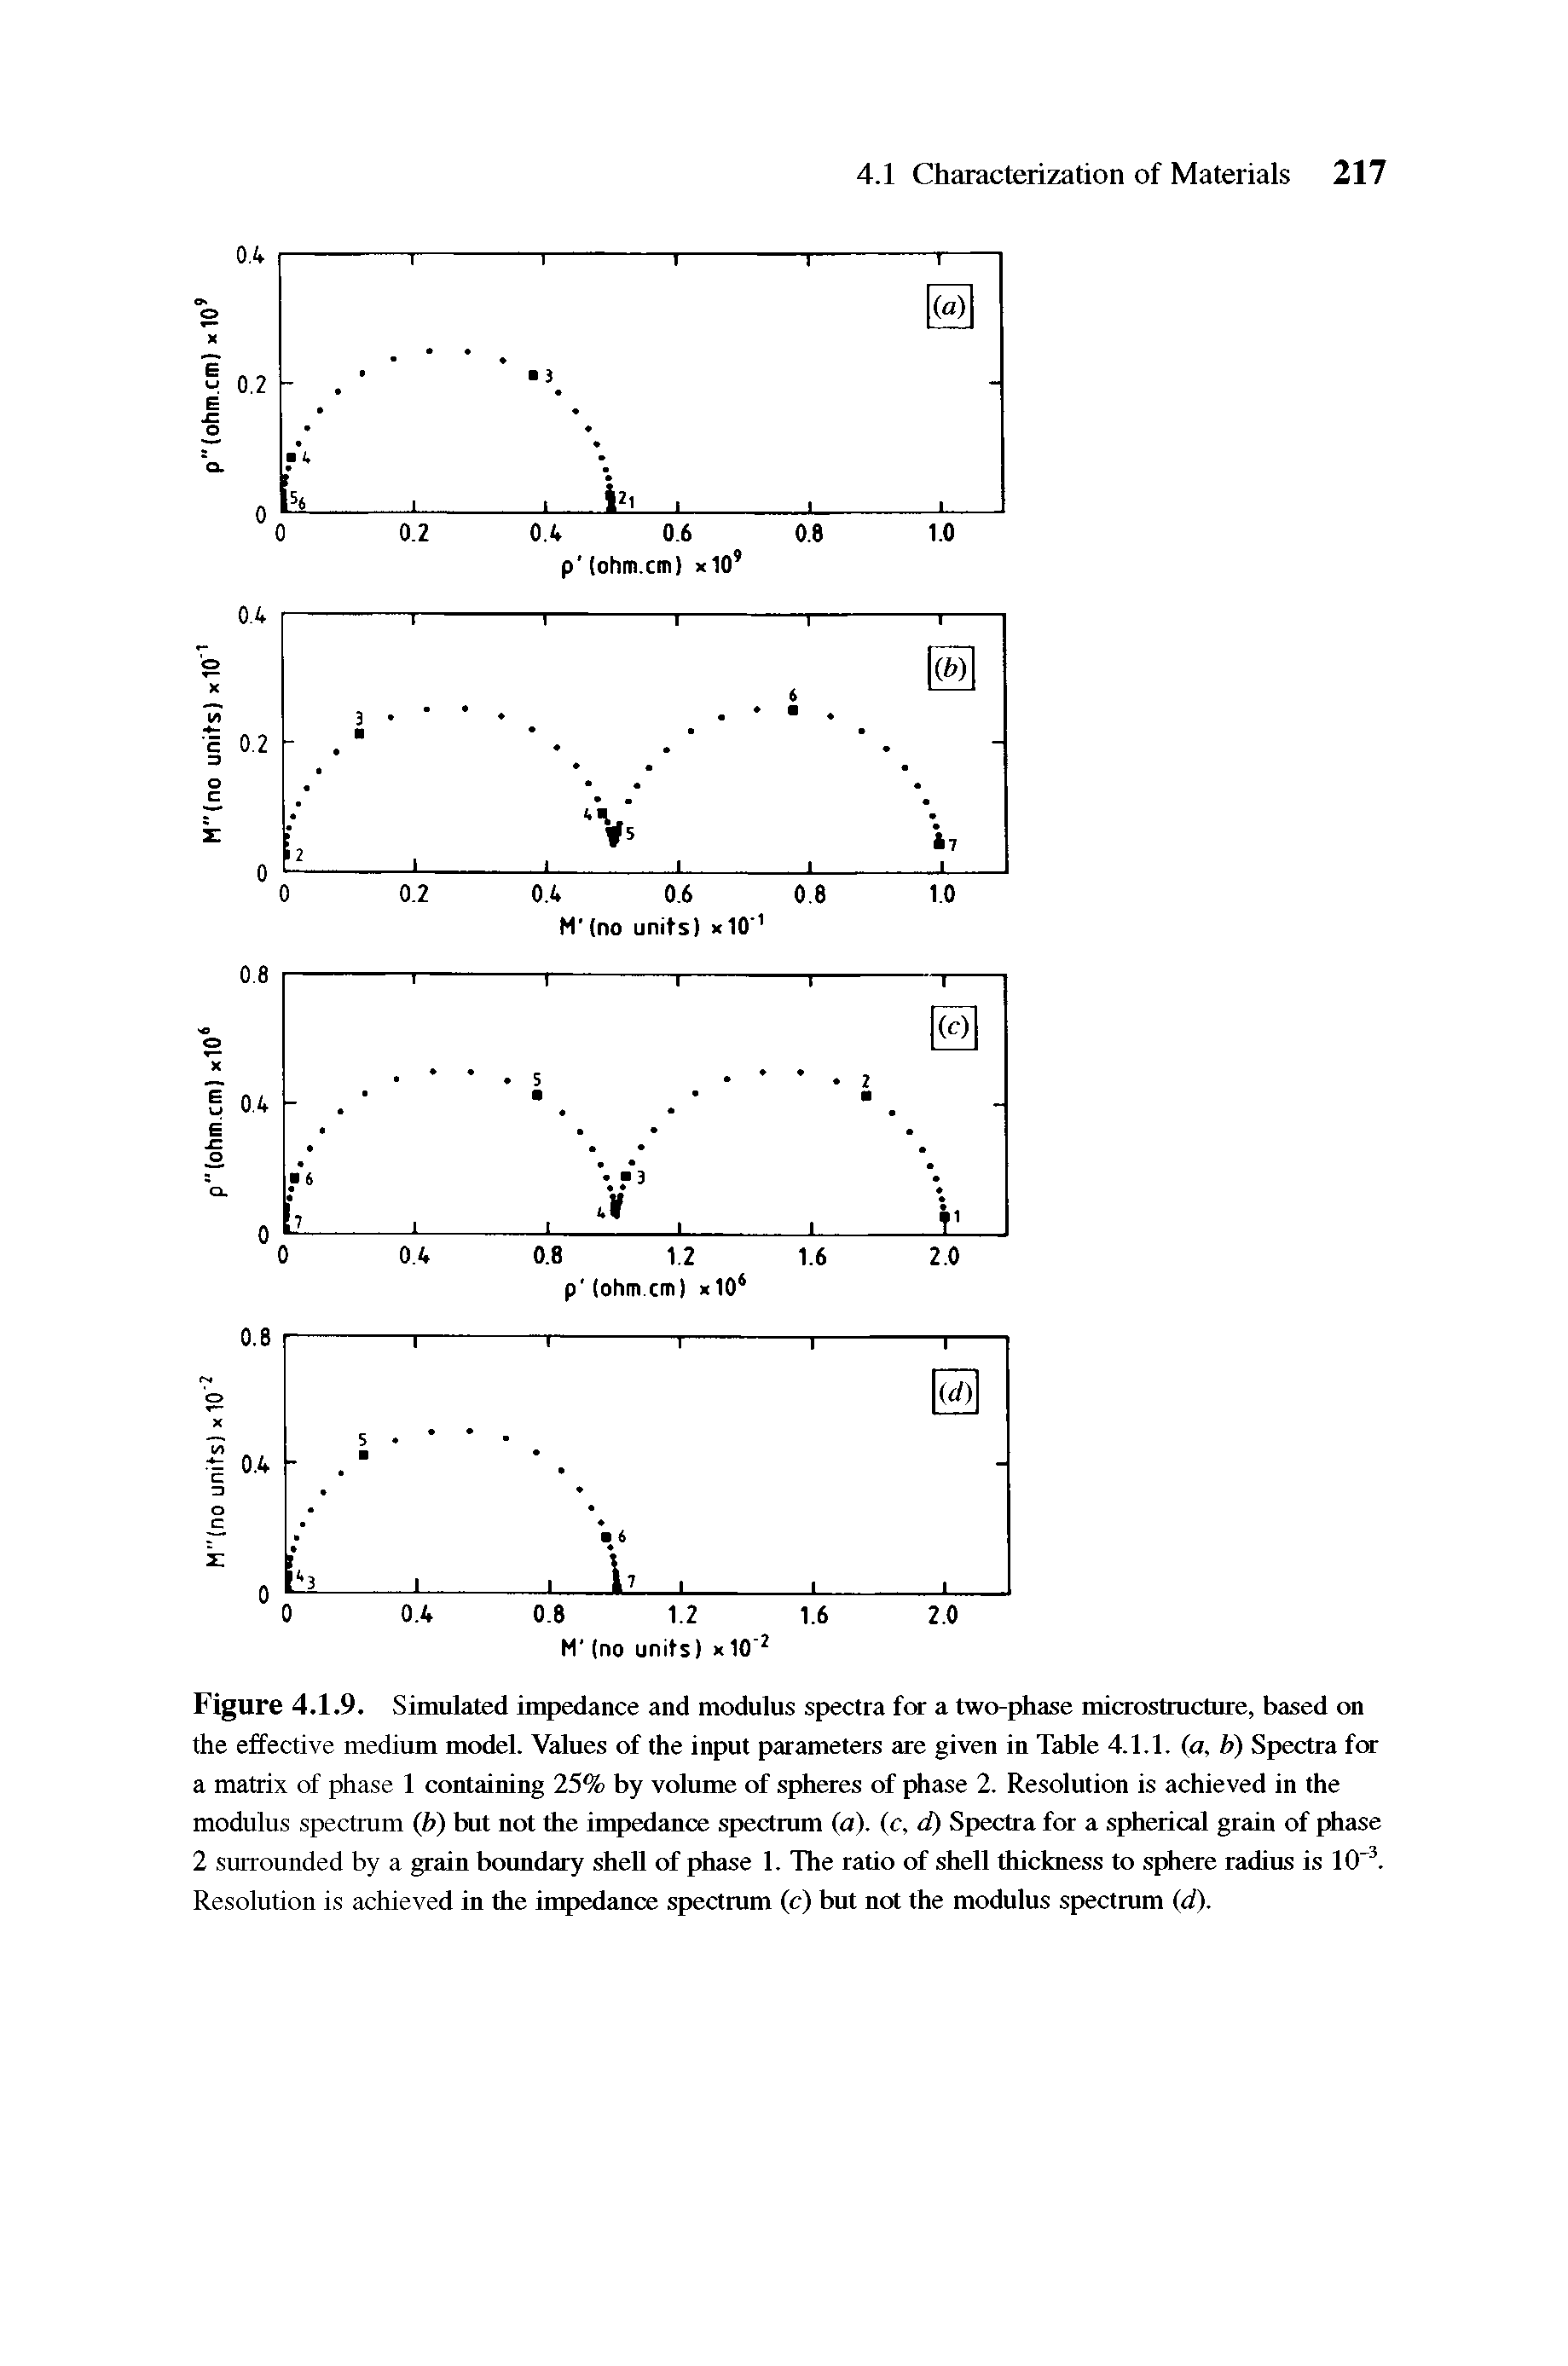 Figure 4.1.9. Simulated impedance and modulus spectra for a two-phase microstructure, based on the effective medium model. Values of the input parameters are given in Table 4.1.1. (a, b) Spectra for a matrix of phase 1 containing 25% by volume of spheres of phase 2. Resolution is achieved in the modulus spectrum (b) but not the impedance spectrum (a), (c, d) Spectra for a spherical grain of phase 2 surrounded by a grain boundary shell of phase 1. The ratio of shell thickness to sphere radius is 10" Resolution is achieved in the impedance spectrum (c) but not the modulus spectrum (d).